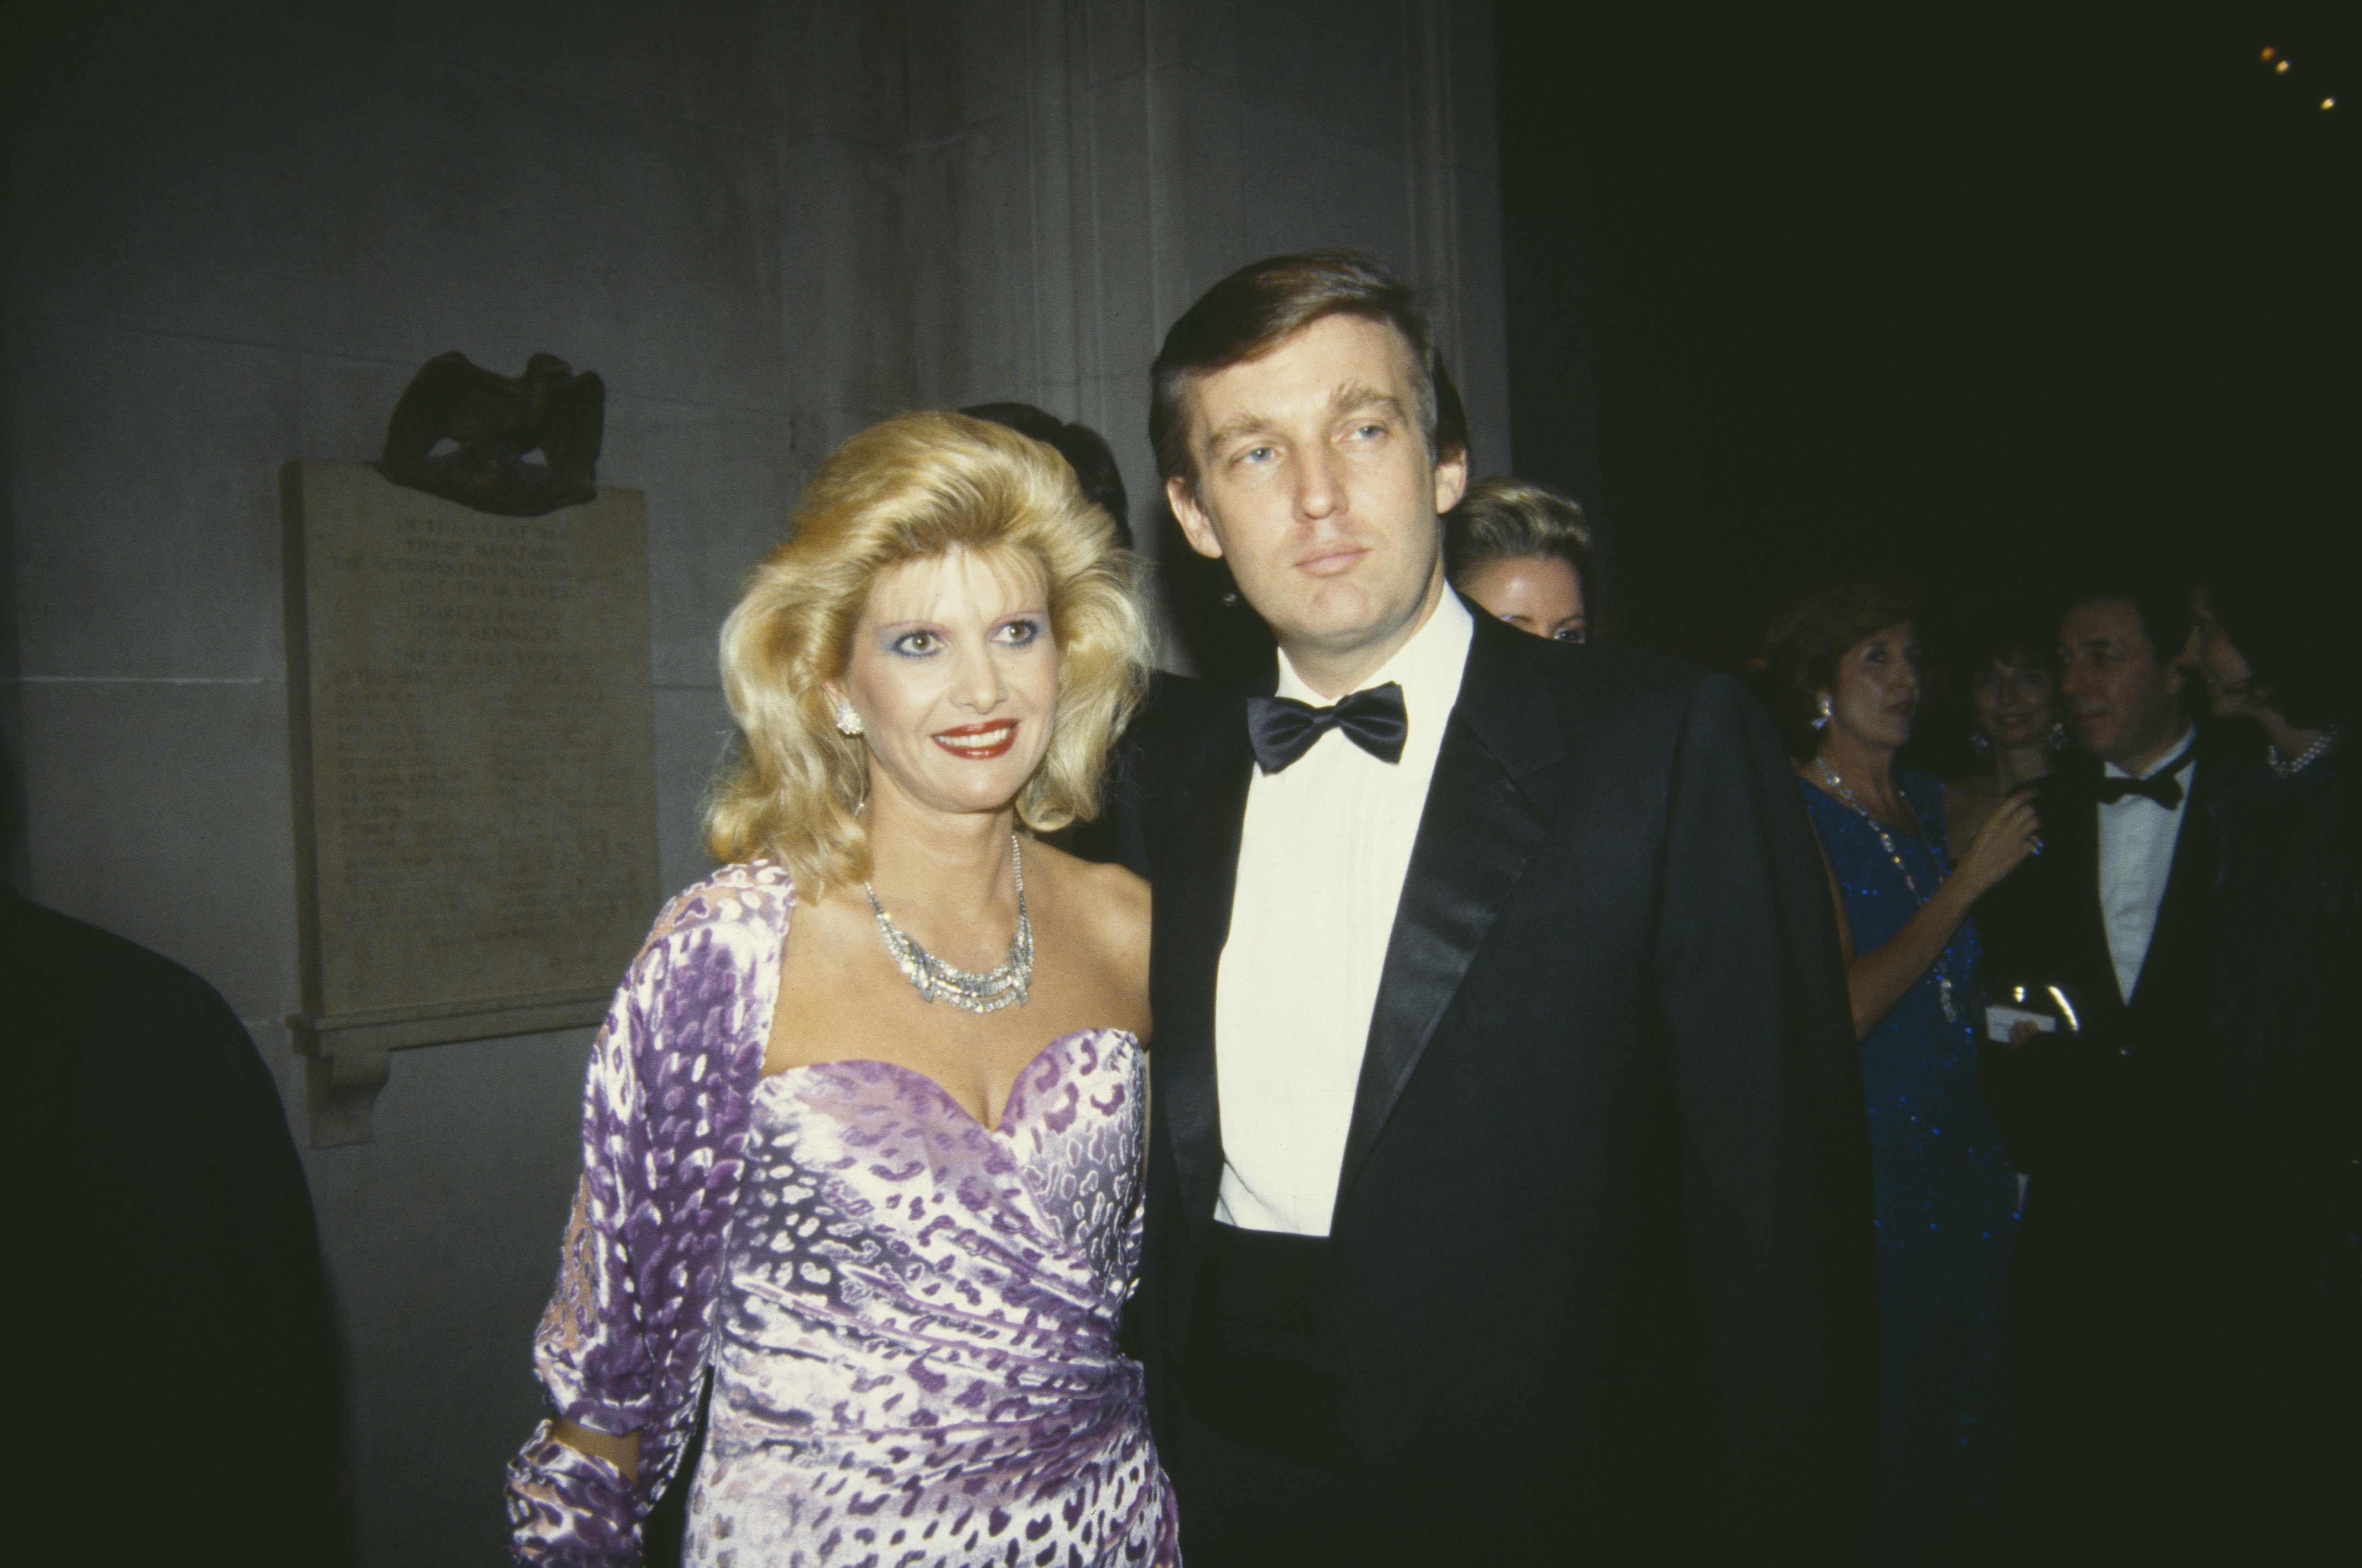 American real estate magnate Donald Trump with his first wife, Ivana (née Zelnickova) at the Costume Institute Gala, held at the Metropolitan Museum of Art in New York, December 9, 1985 |  Source: Getty Images